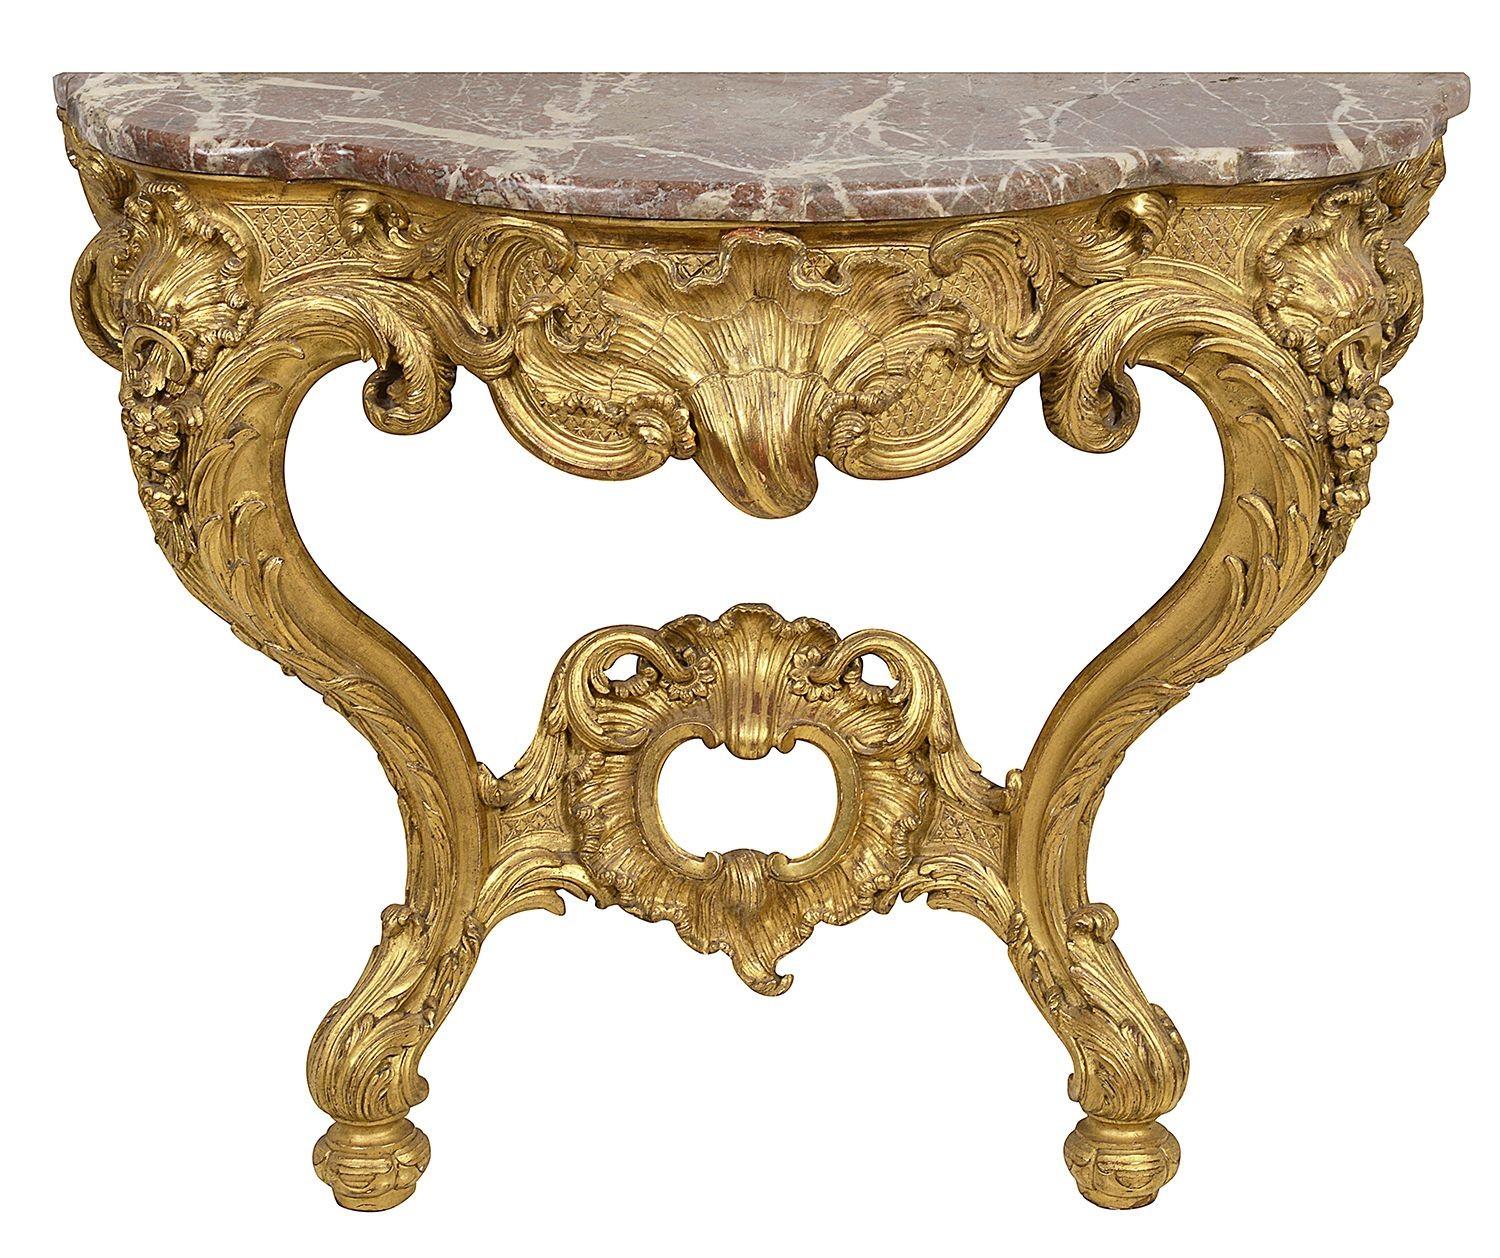 A very good quality pair of 19th century French carved giltwood console tables. Each having their original Levanto rouge marble tops, wonderful classical scrolling foliate and shell like decoration, raised on elegant cabriole legs, united by a